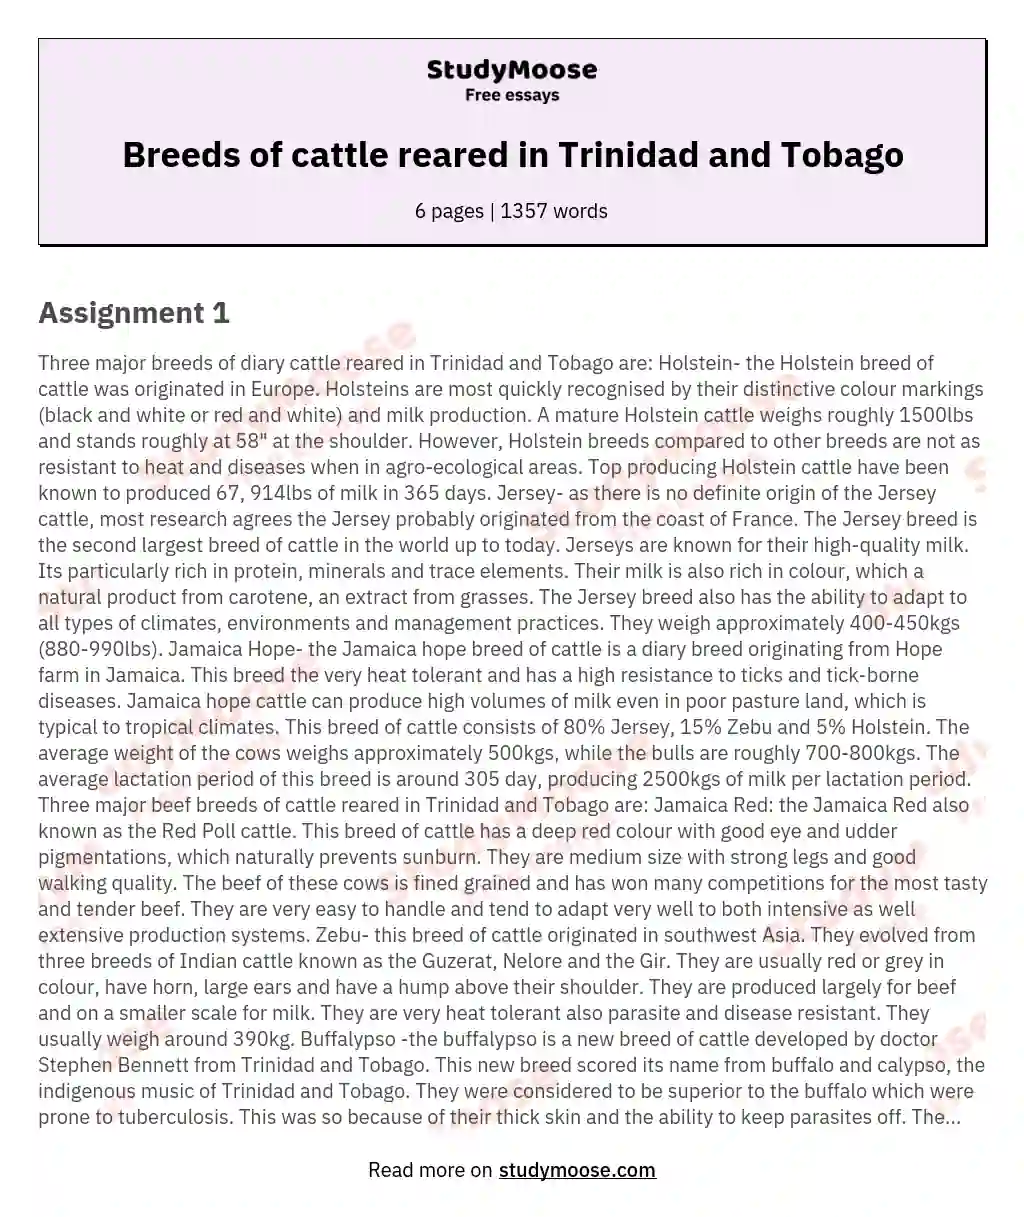 Breeds of cattle reared in Trinidad and Tobago essay